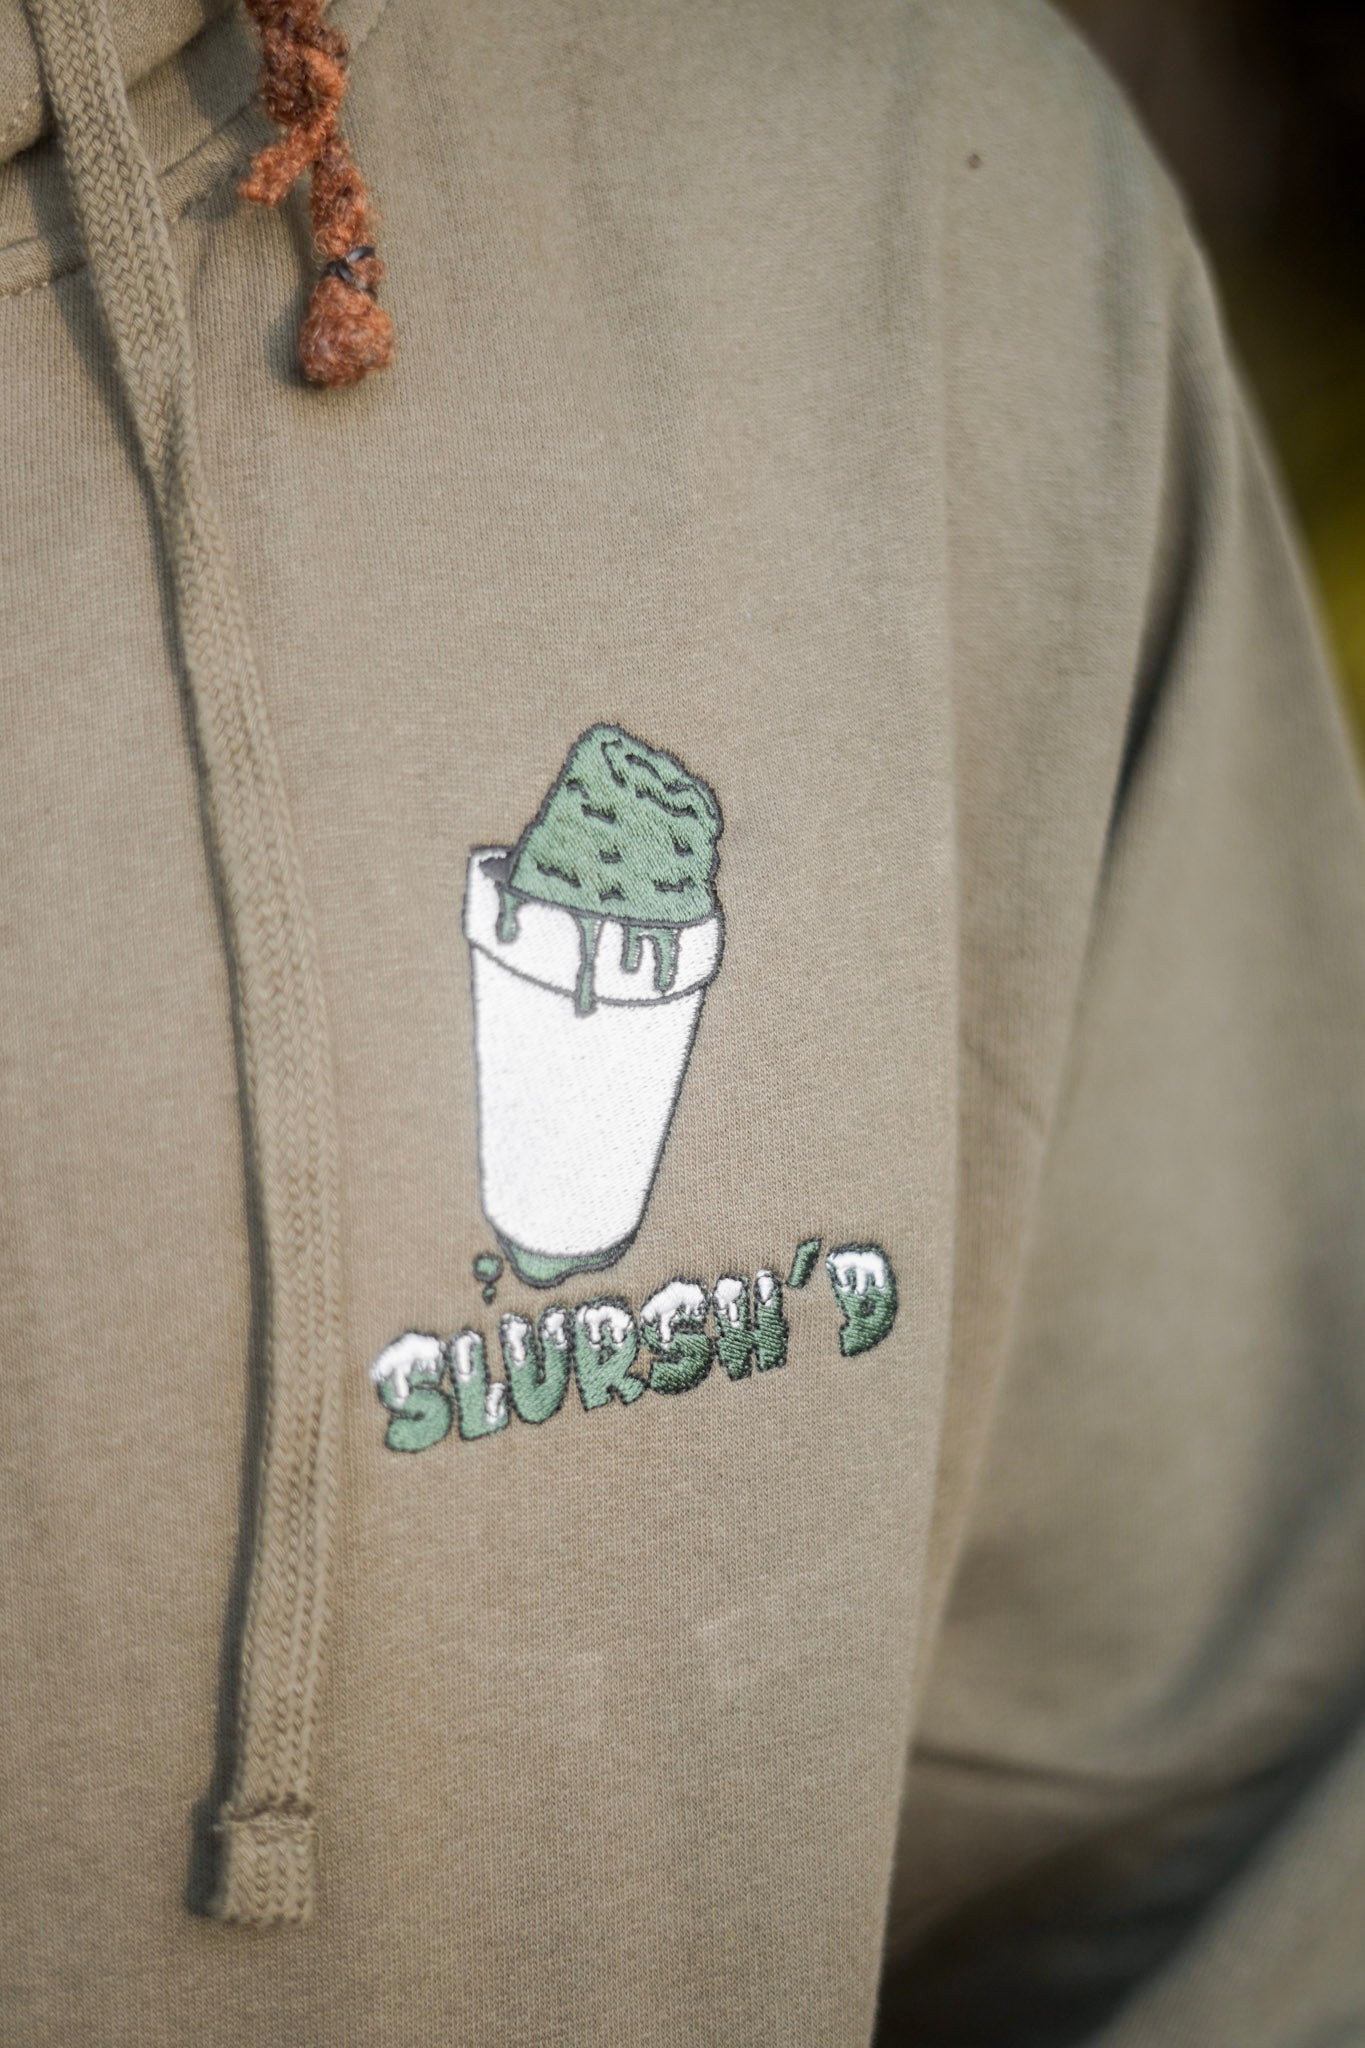 "CUPS UP" EMBROIDERED HOODIE